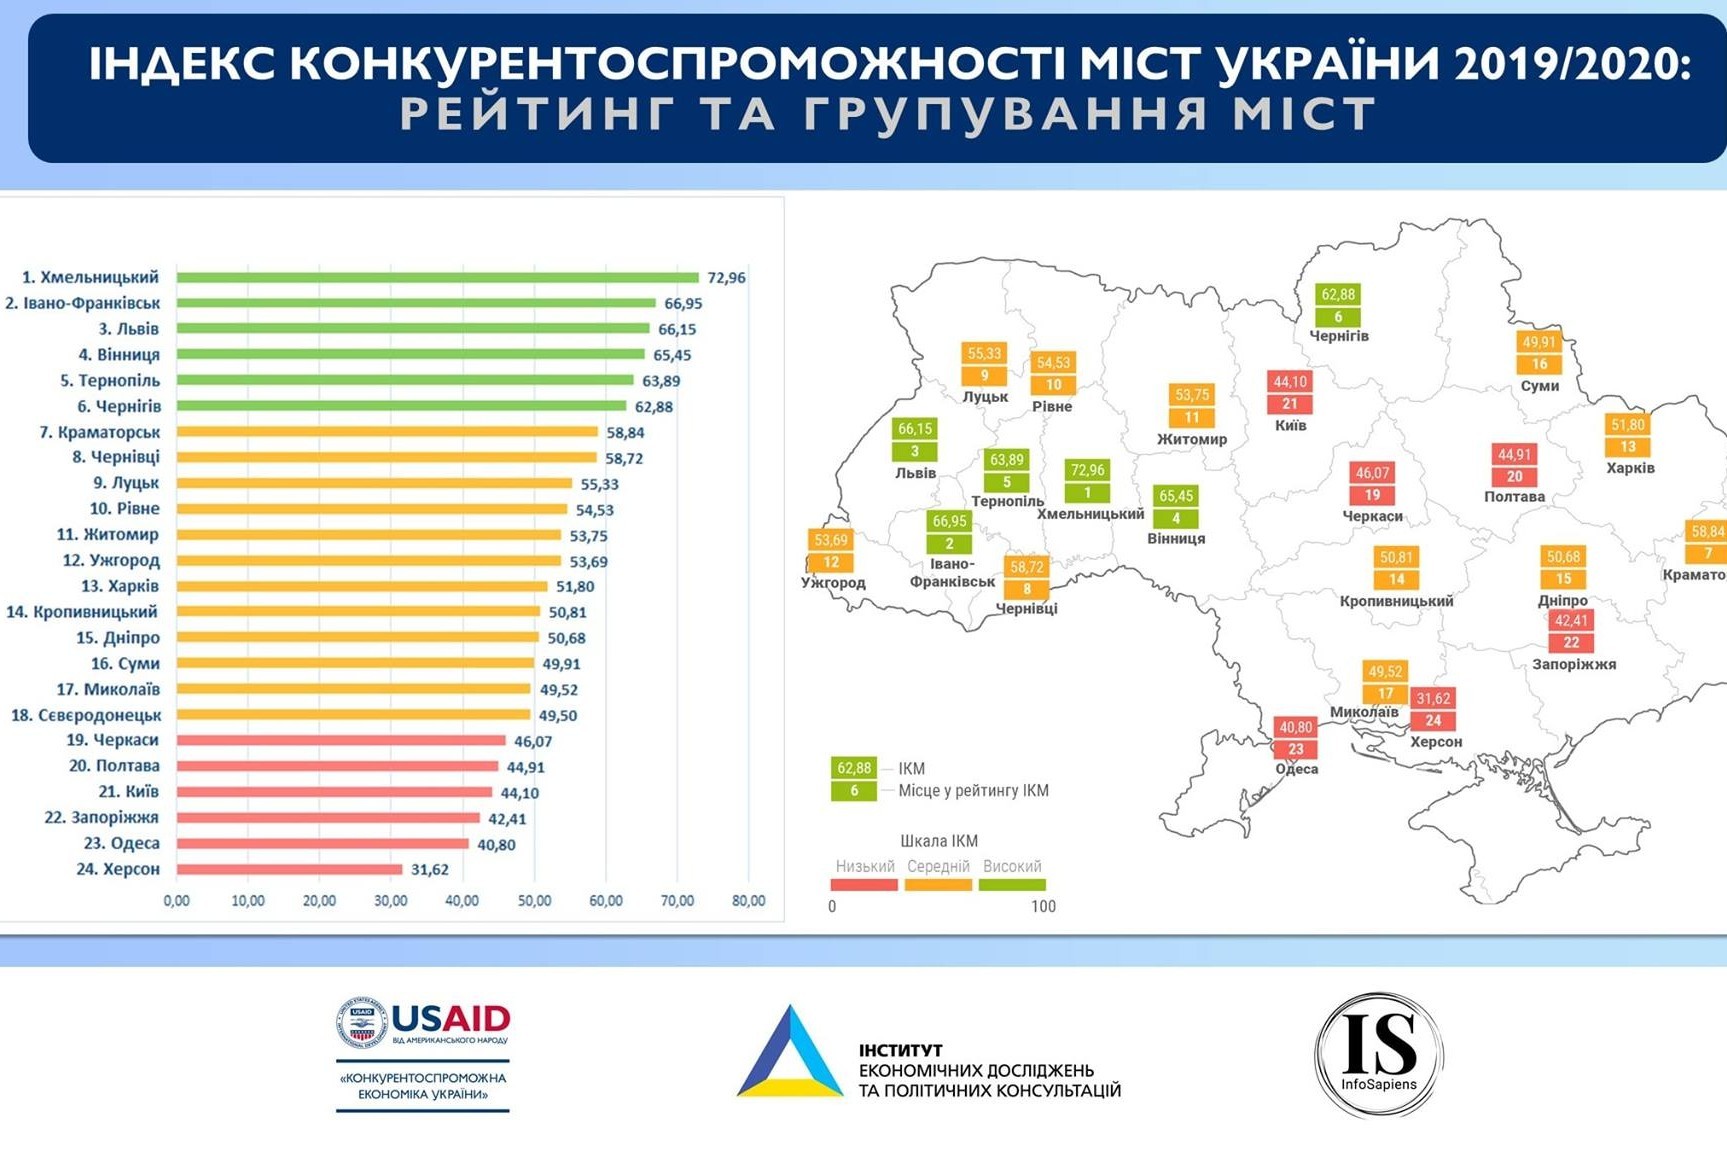 Vinnytsia is recognized as one of the best cities in Ukraine with the most favorable business climate and effective economic governance